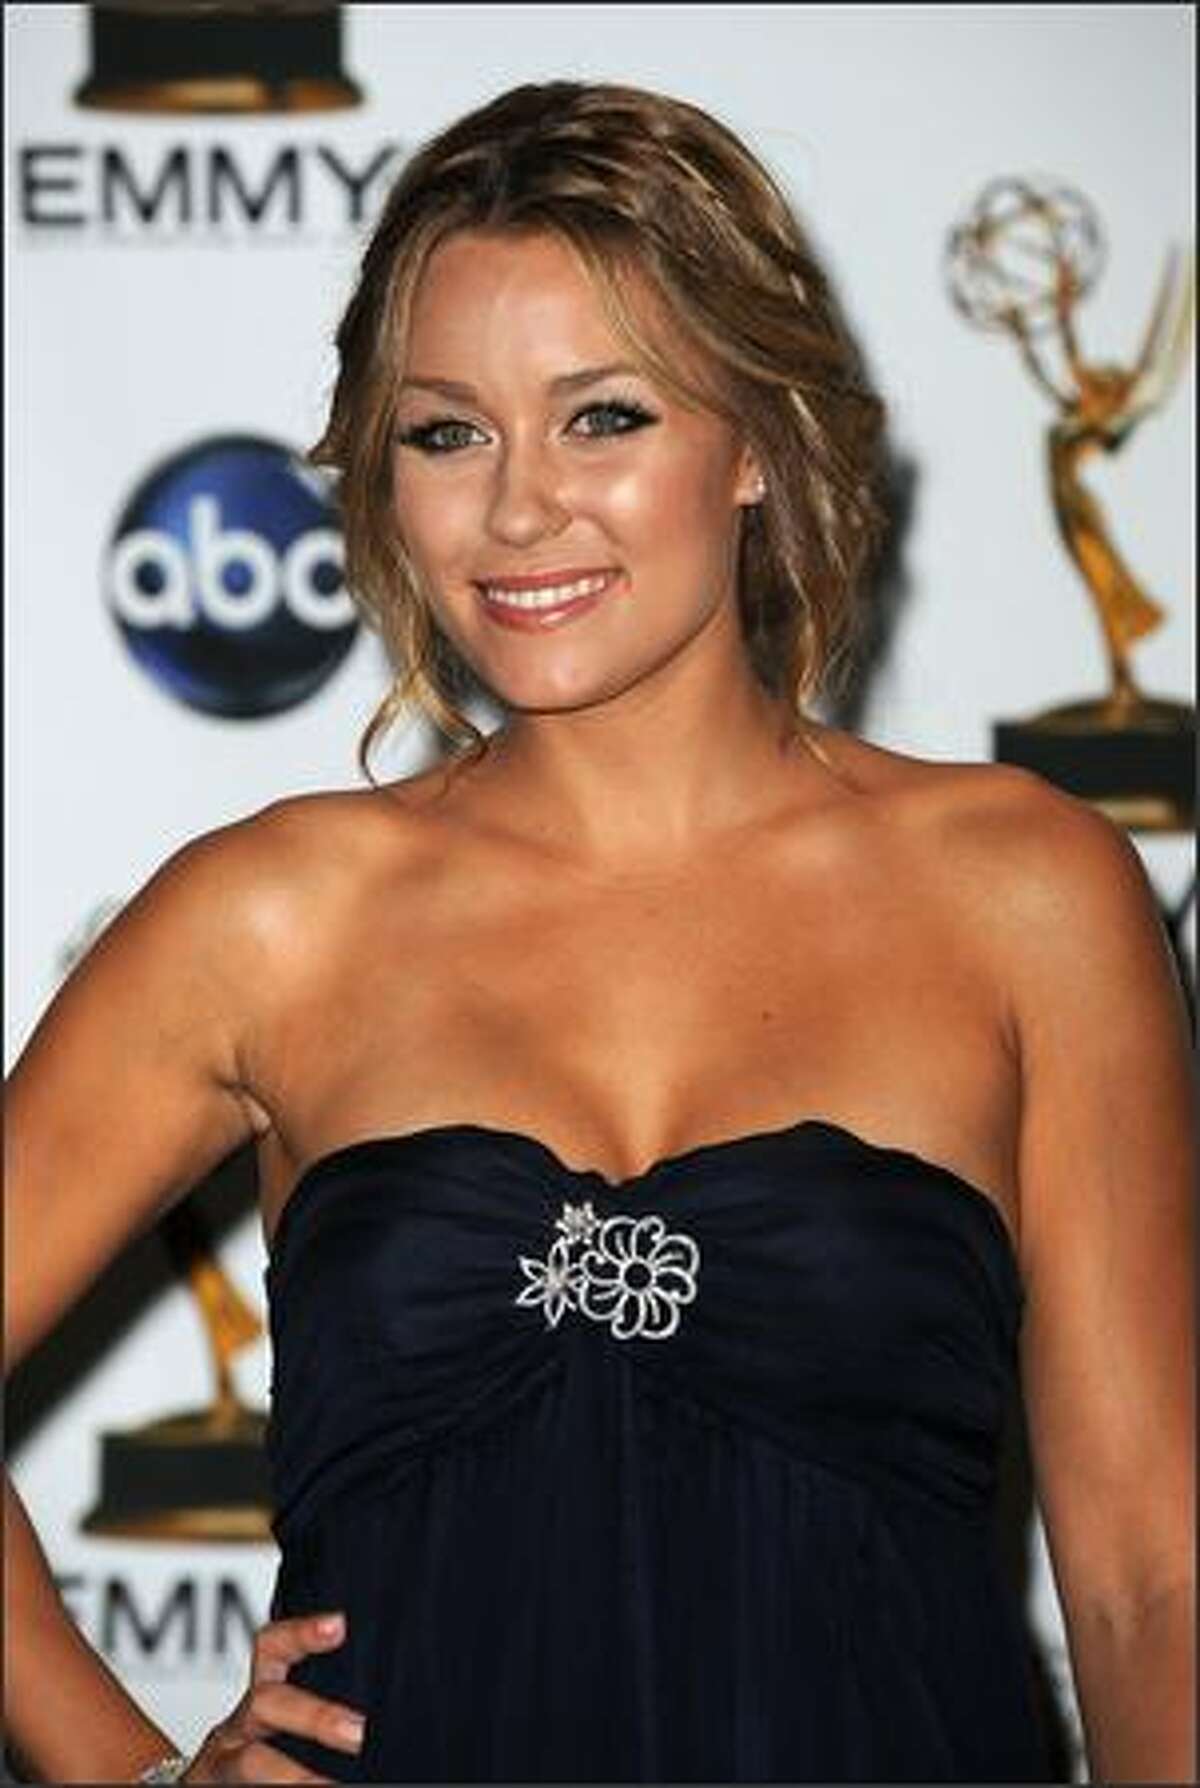 Actress Lauren Conrad poses in the press room at the 60th Primetime Emmy Awards at the Noika Theatre in Los Angeles on September 21, 2008. AFP PHOTO Robyn BECK